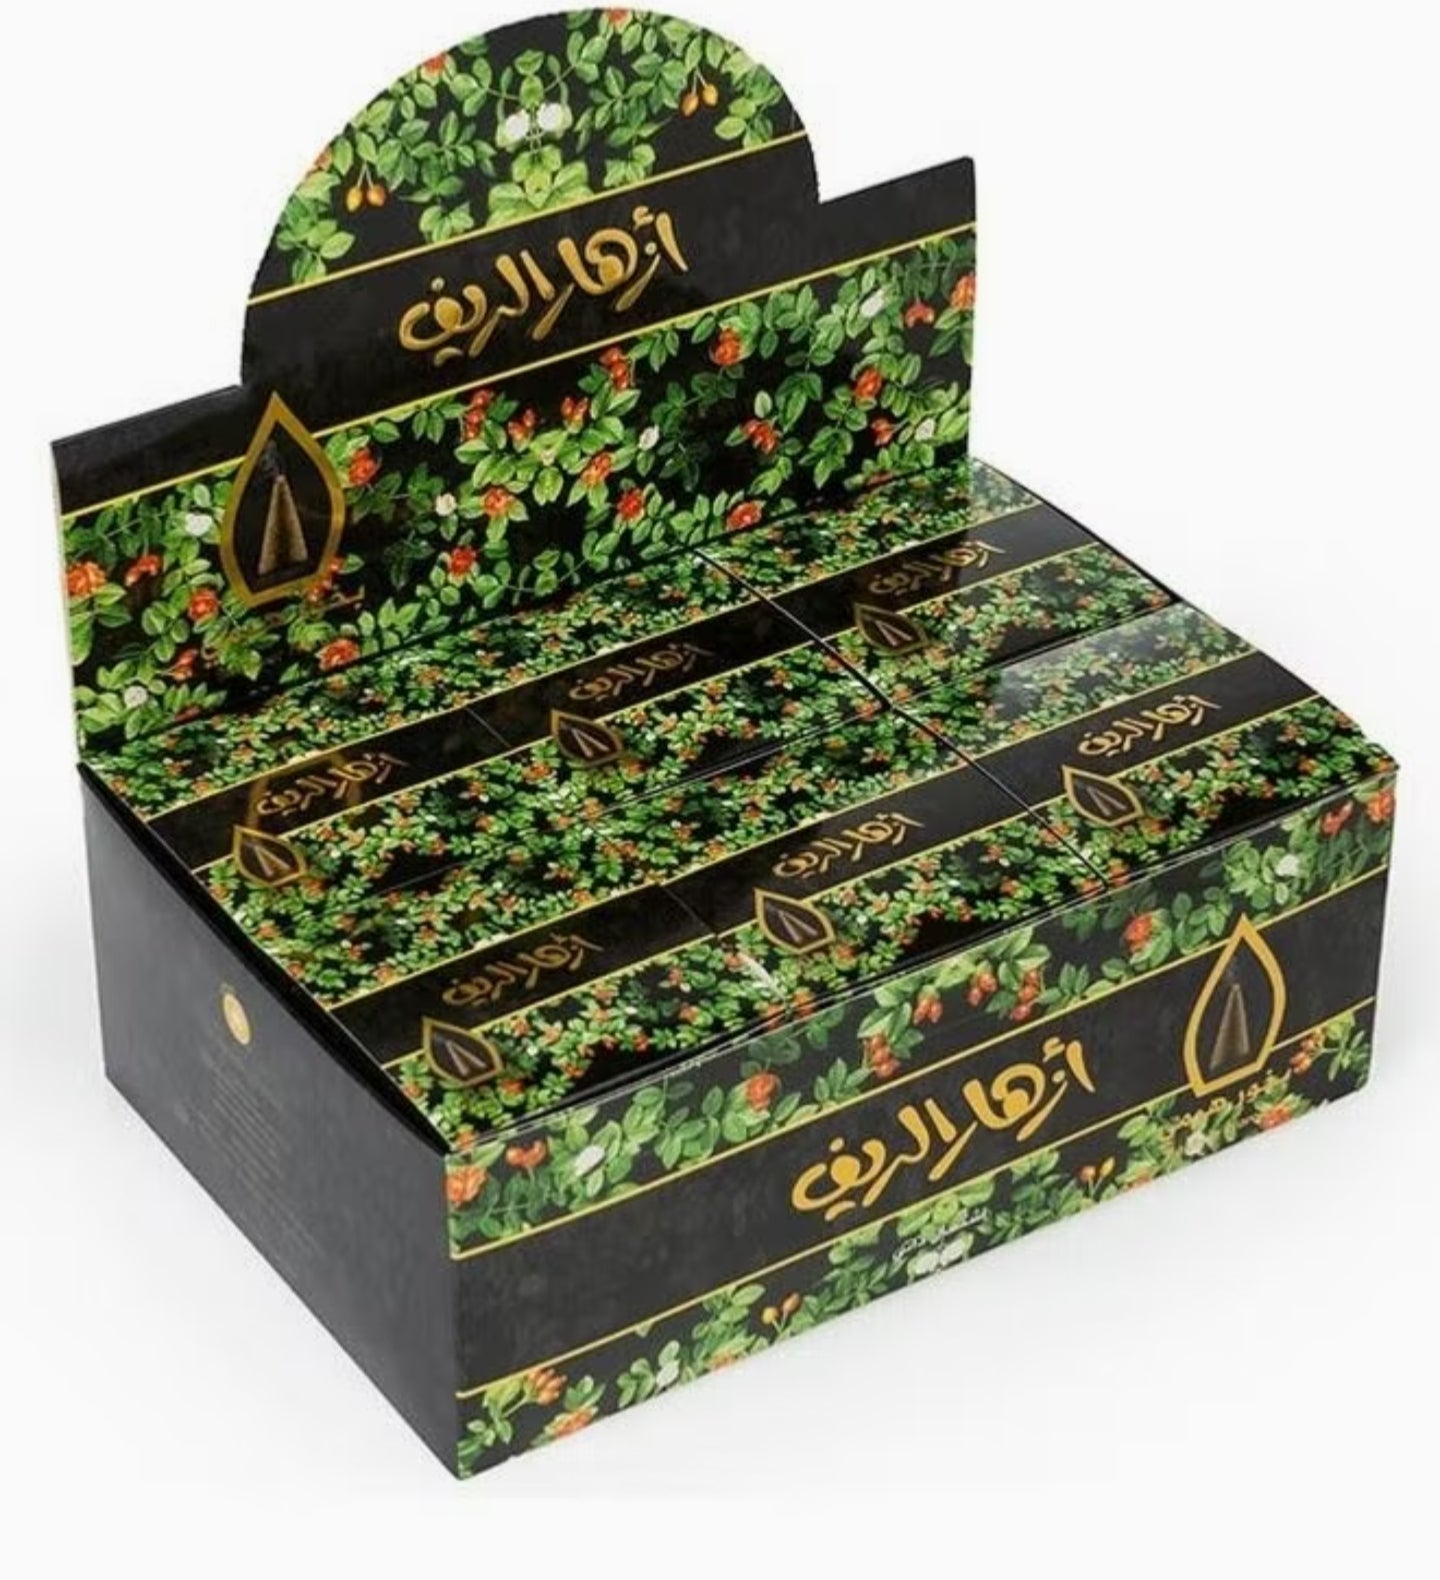 These Bakhoor Incense Pods emits a scented fragrance that is sure to scheme your mood. There are 12 pods in each pack. Every bakhoor Pod is self ignite which means no charcoal needed. Each bakhoor incense pod burn for around 15-30 minutes and the fragrance last for a couple of day to fragrance your home or office.  